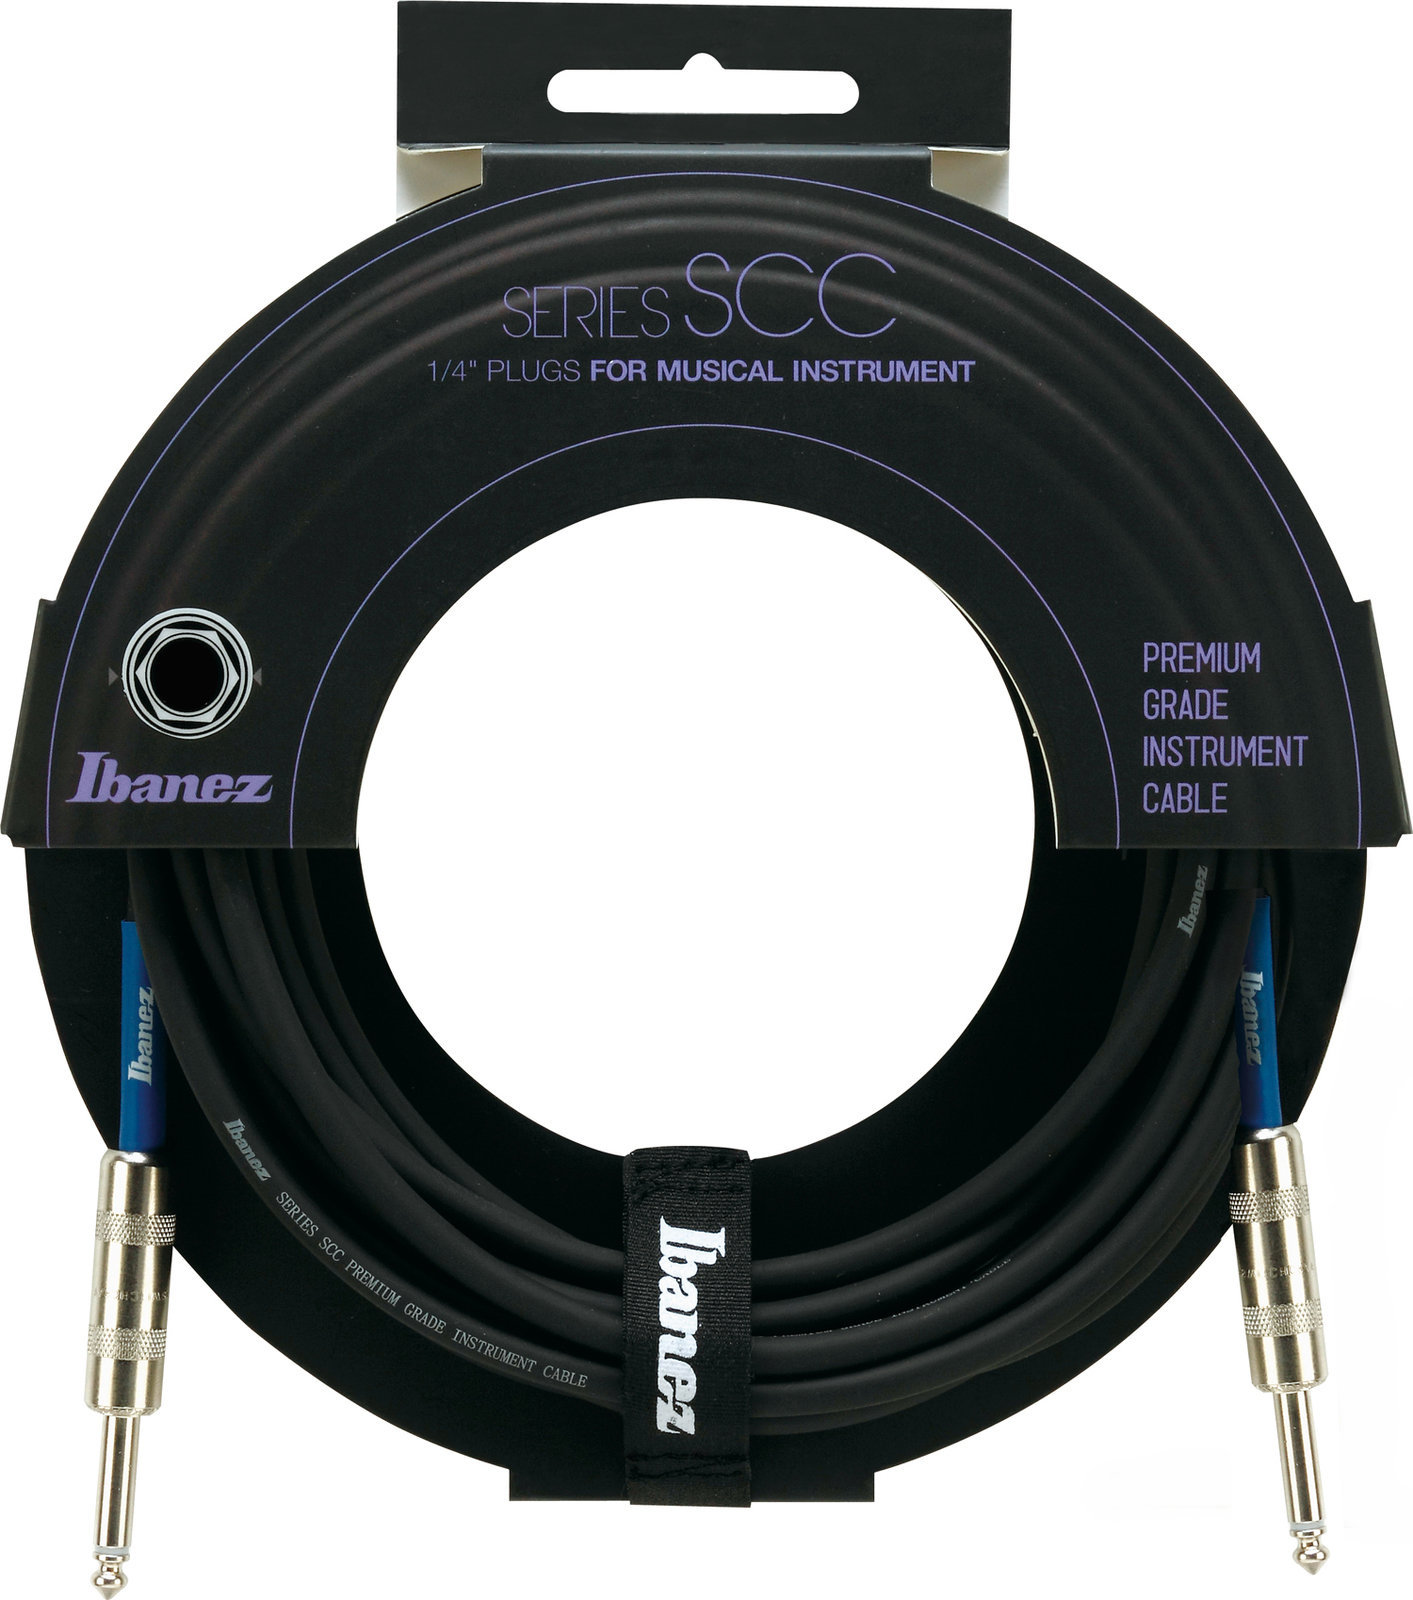 Cabo do instrumento Ibanez SCC 10 Guitar Instruments Cable 3 m